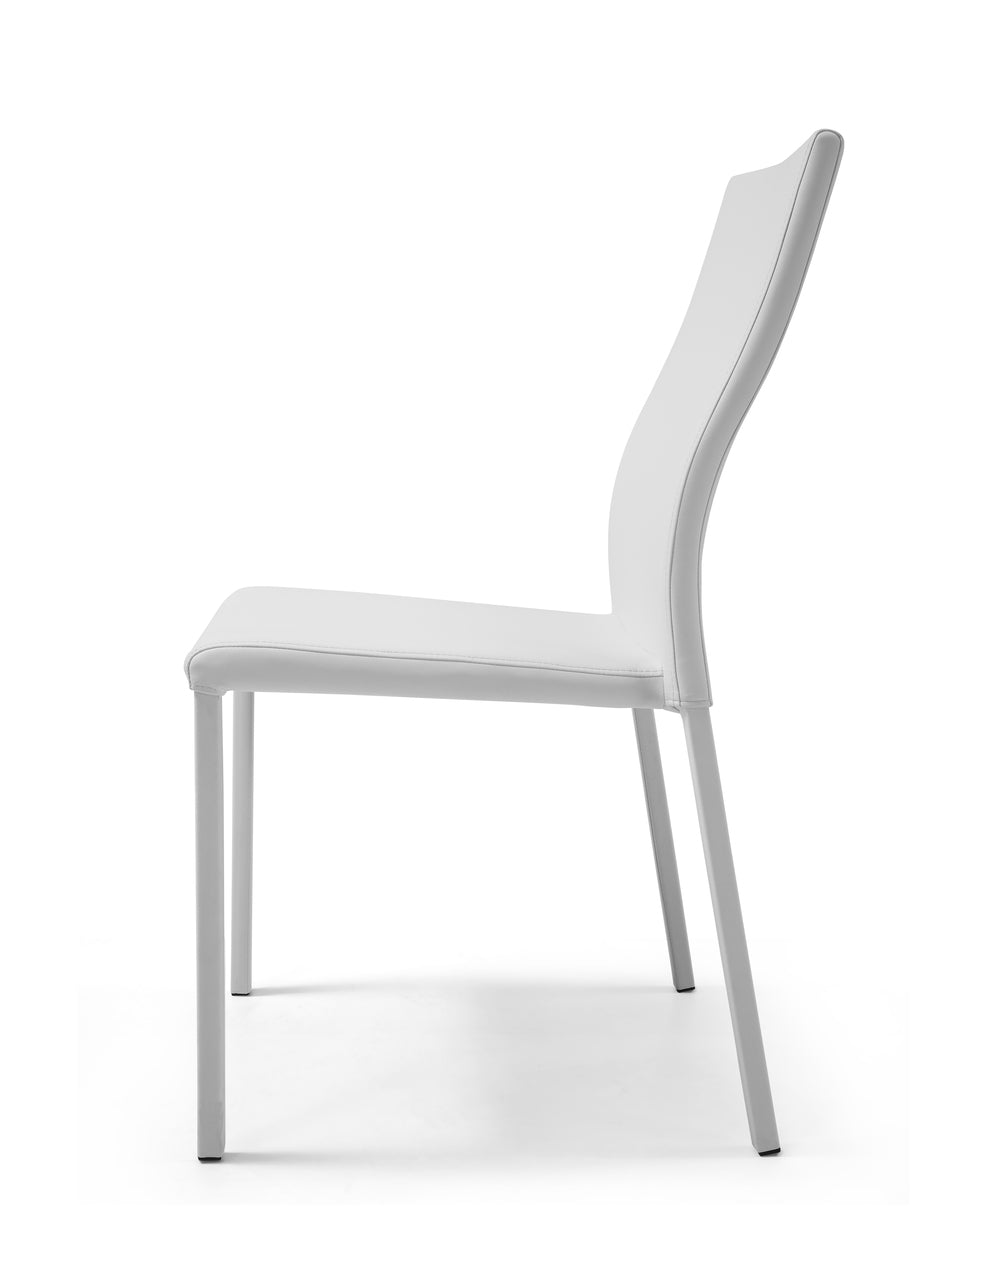 Ellie Dining Chair White - Set of 4 by Whiteline